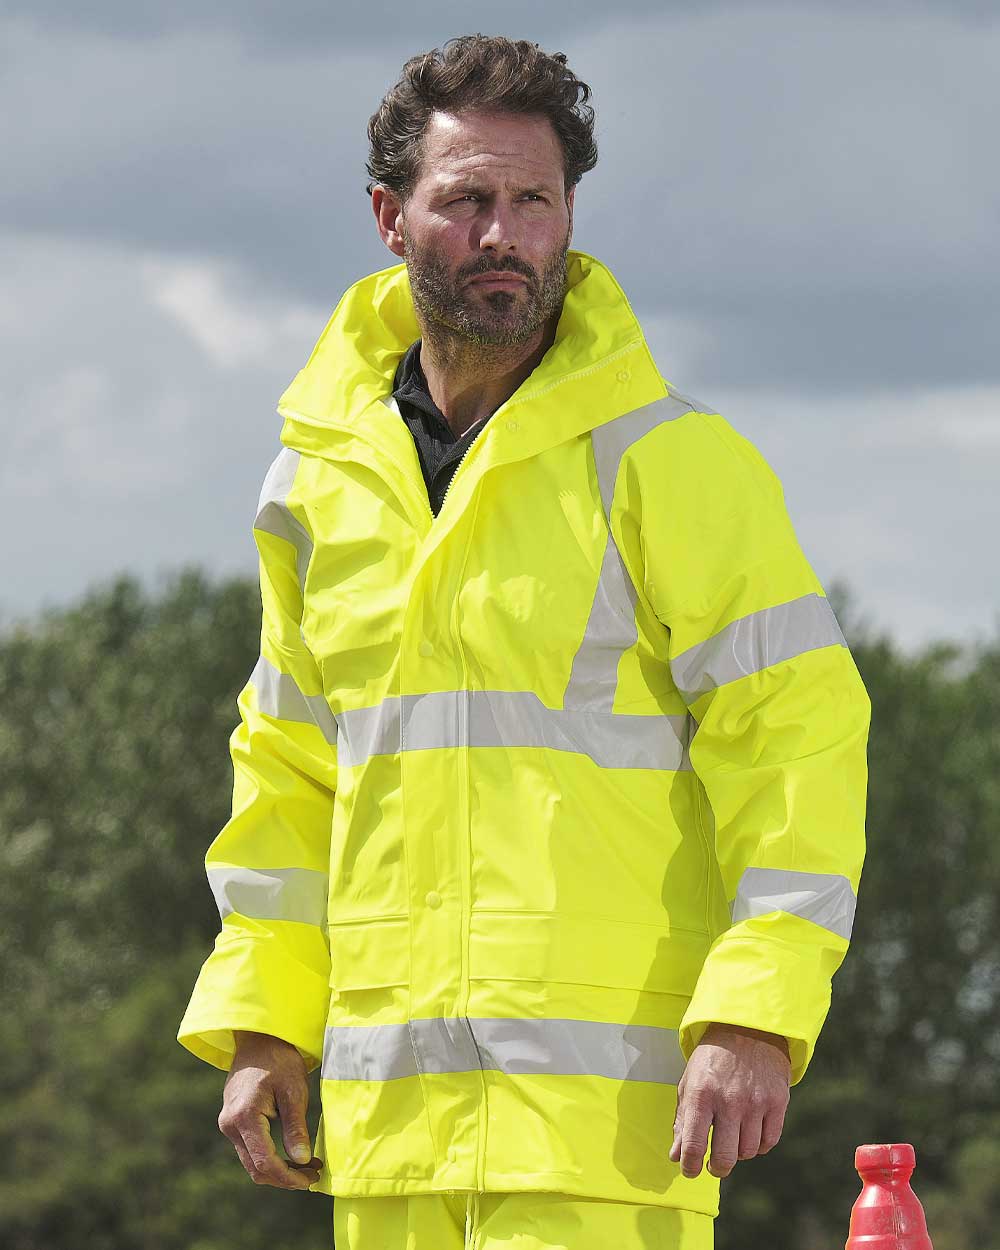 Man wearing Fort Air Reflex Waterproof Hi-vis Jacket in yellow with reflective strips